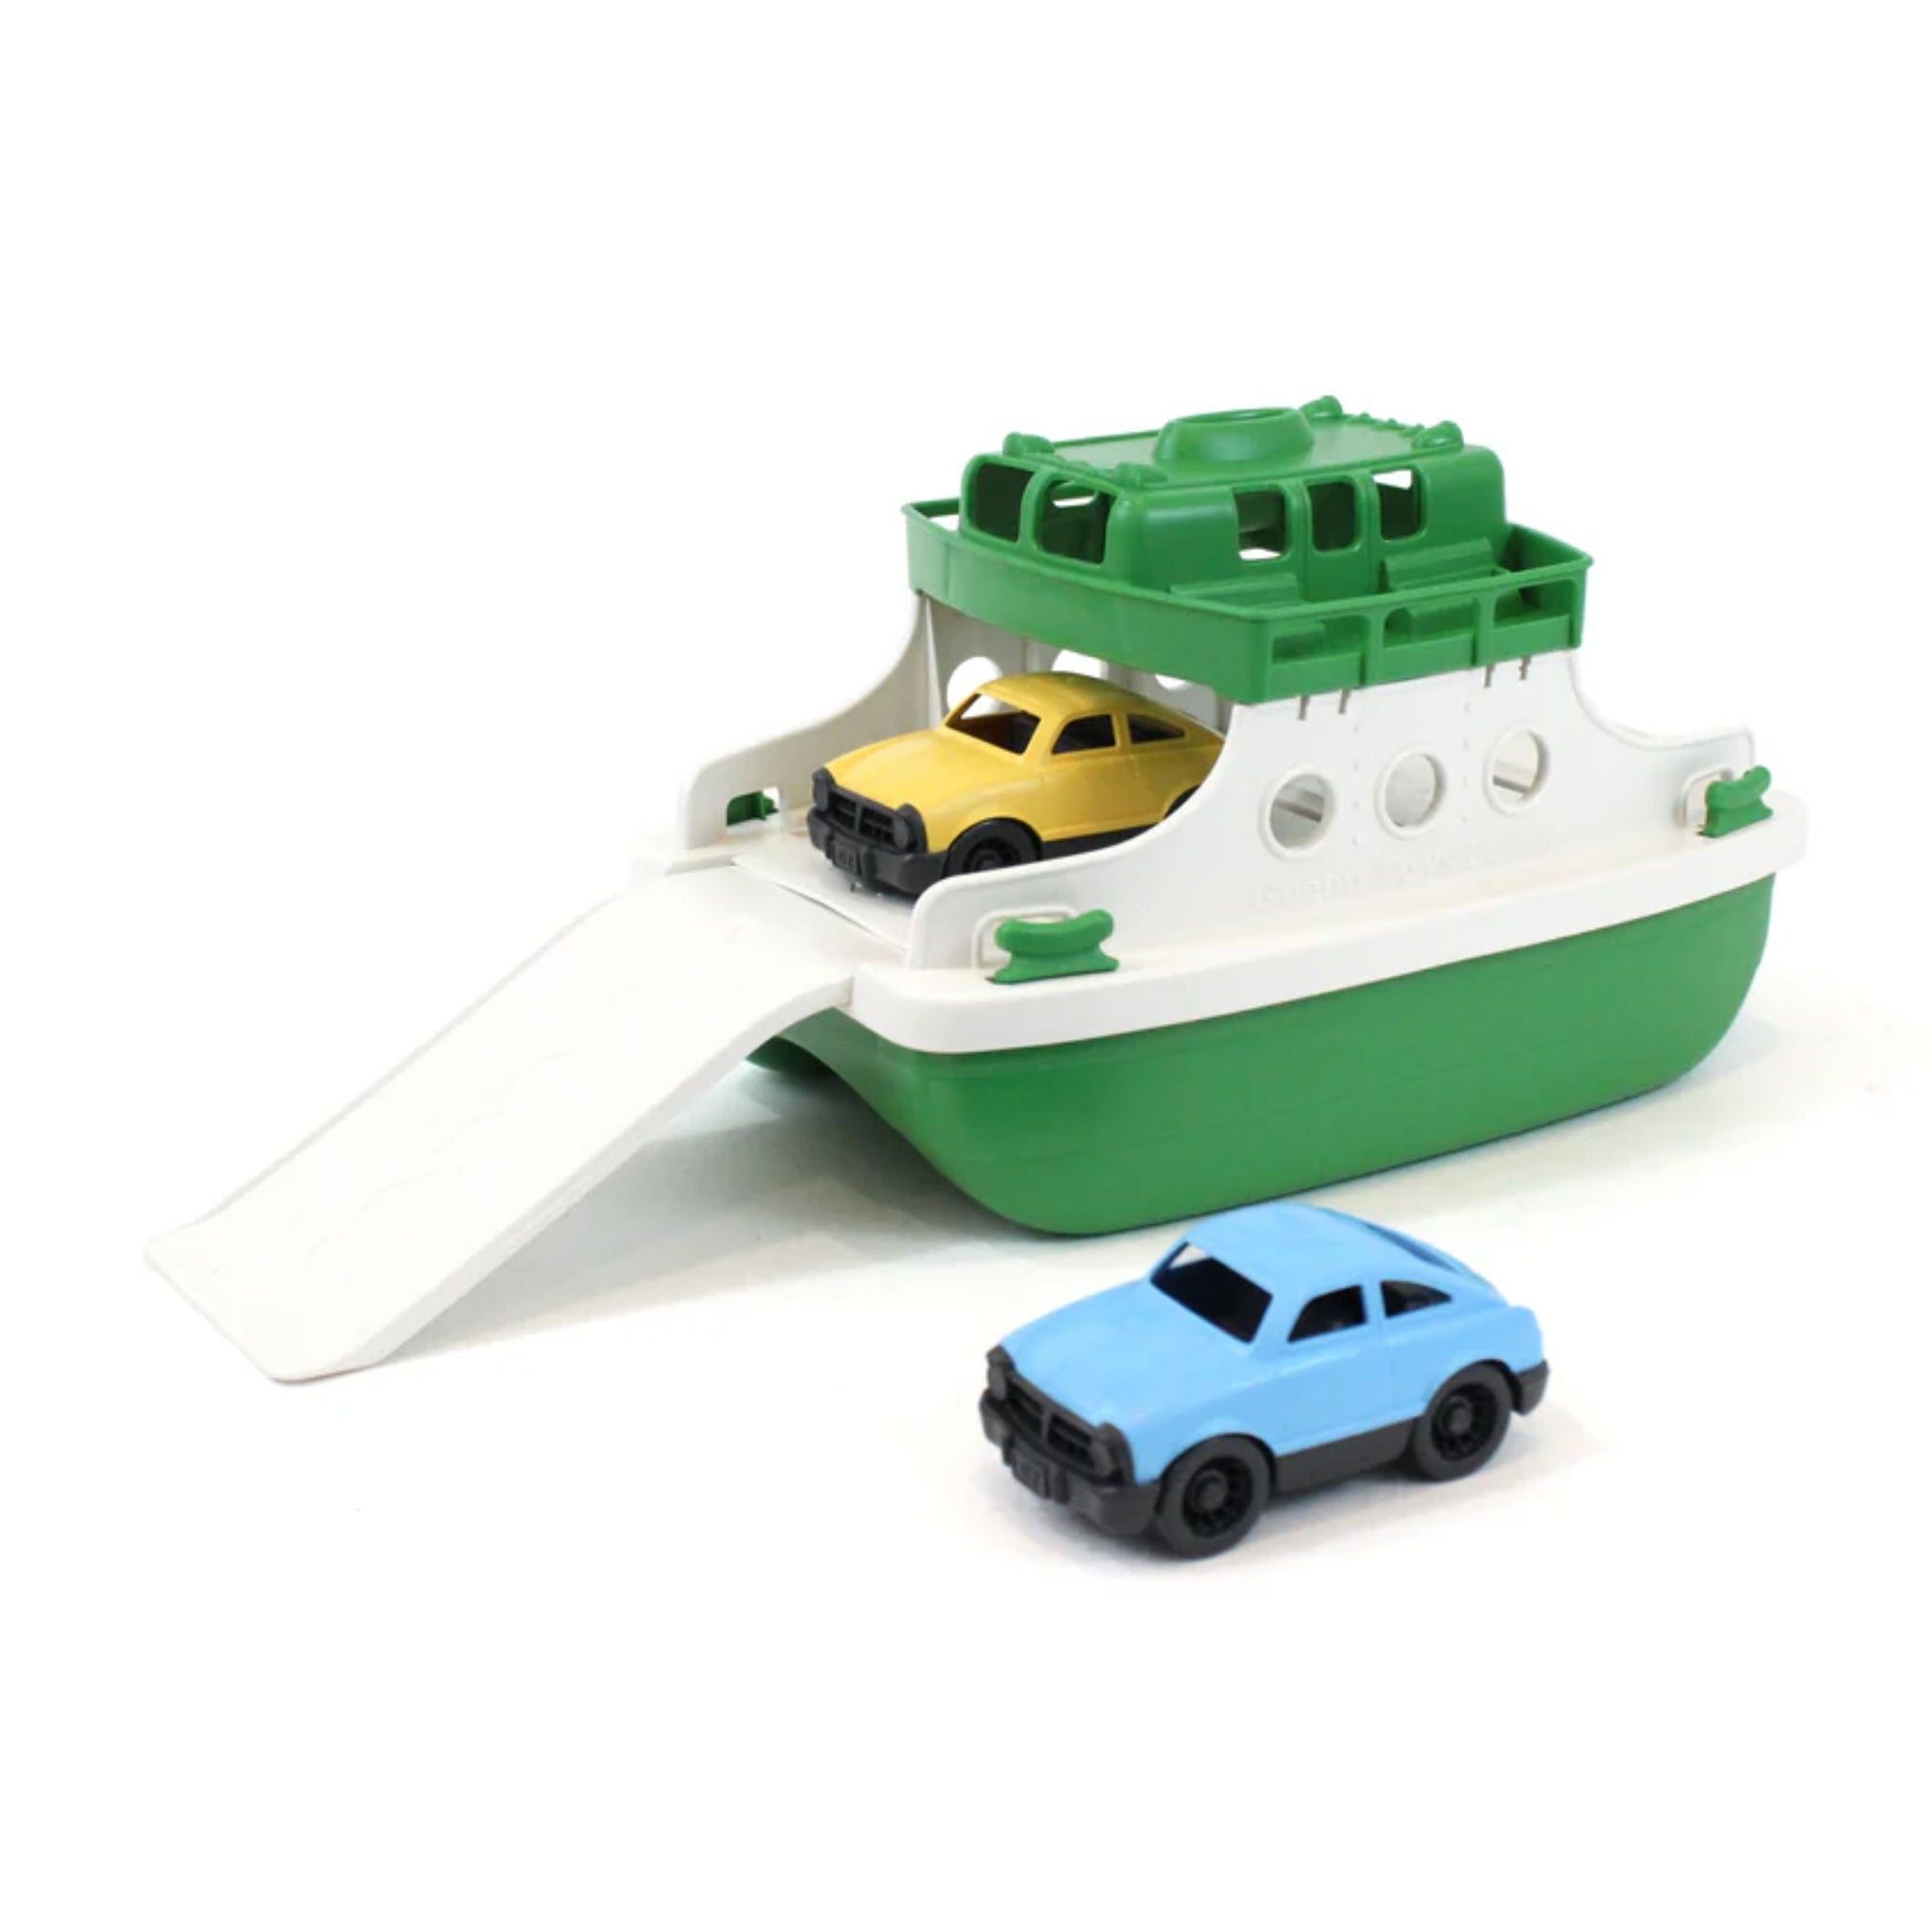 Green Toys Ferry Boat - Green and White